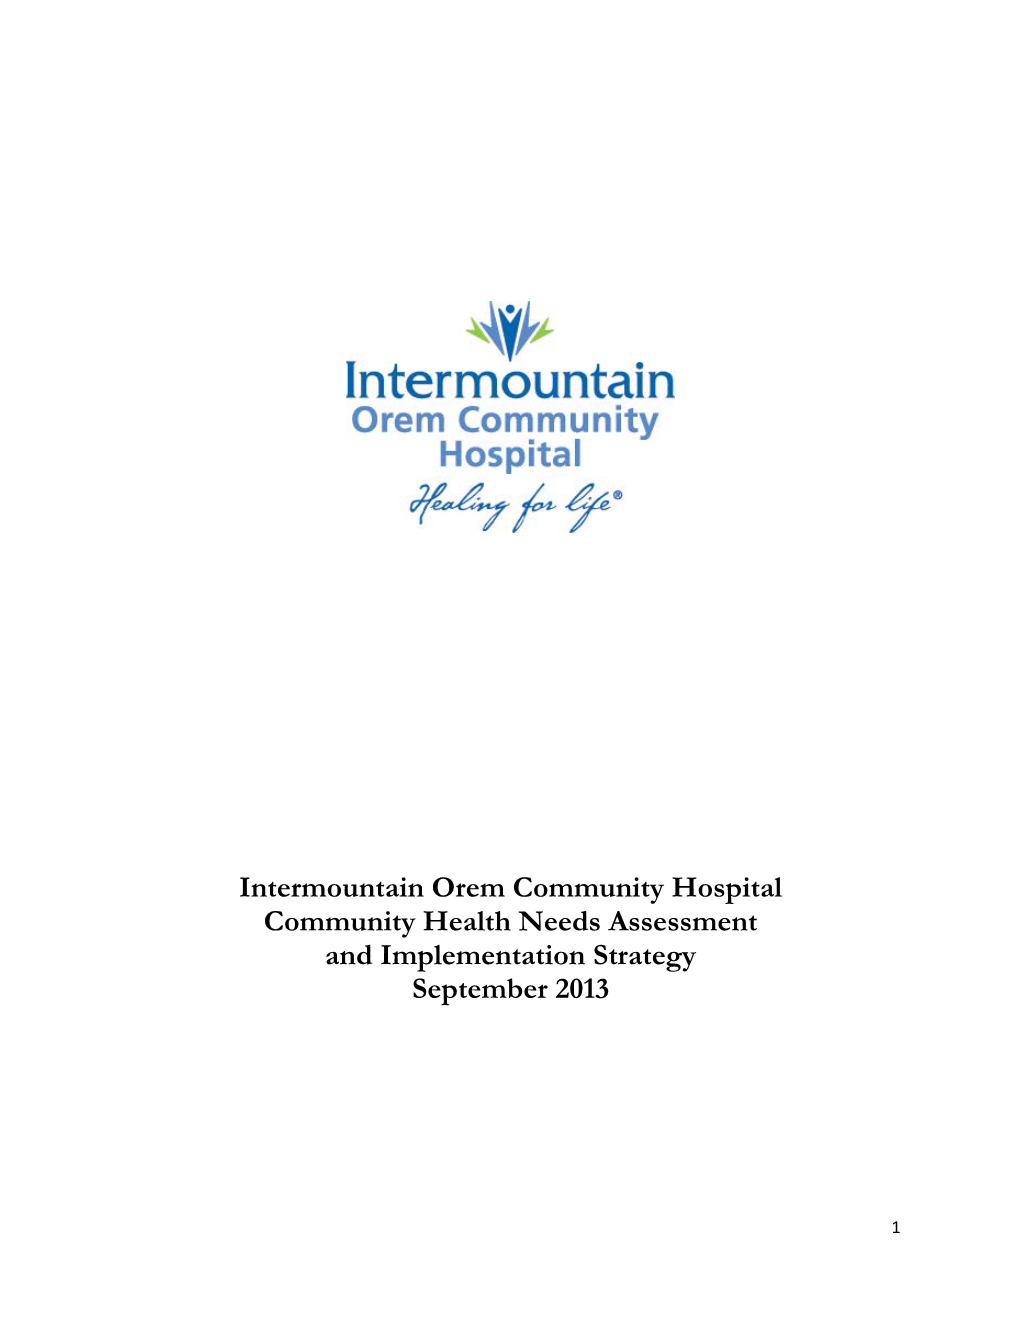 Intermountain Orem Community Hospital Community Health Needs Assessment and Implementation Strategy September 2013